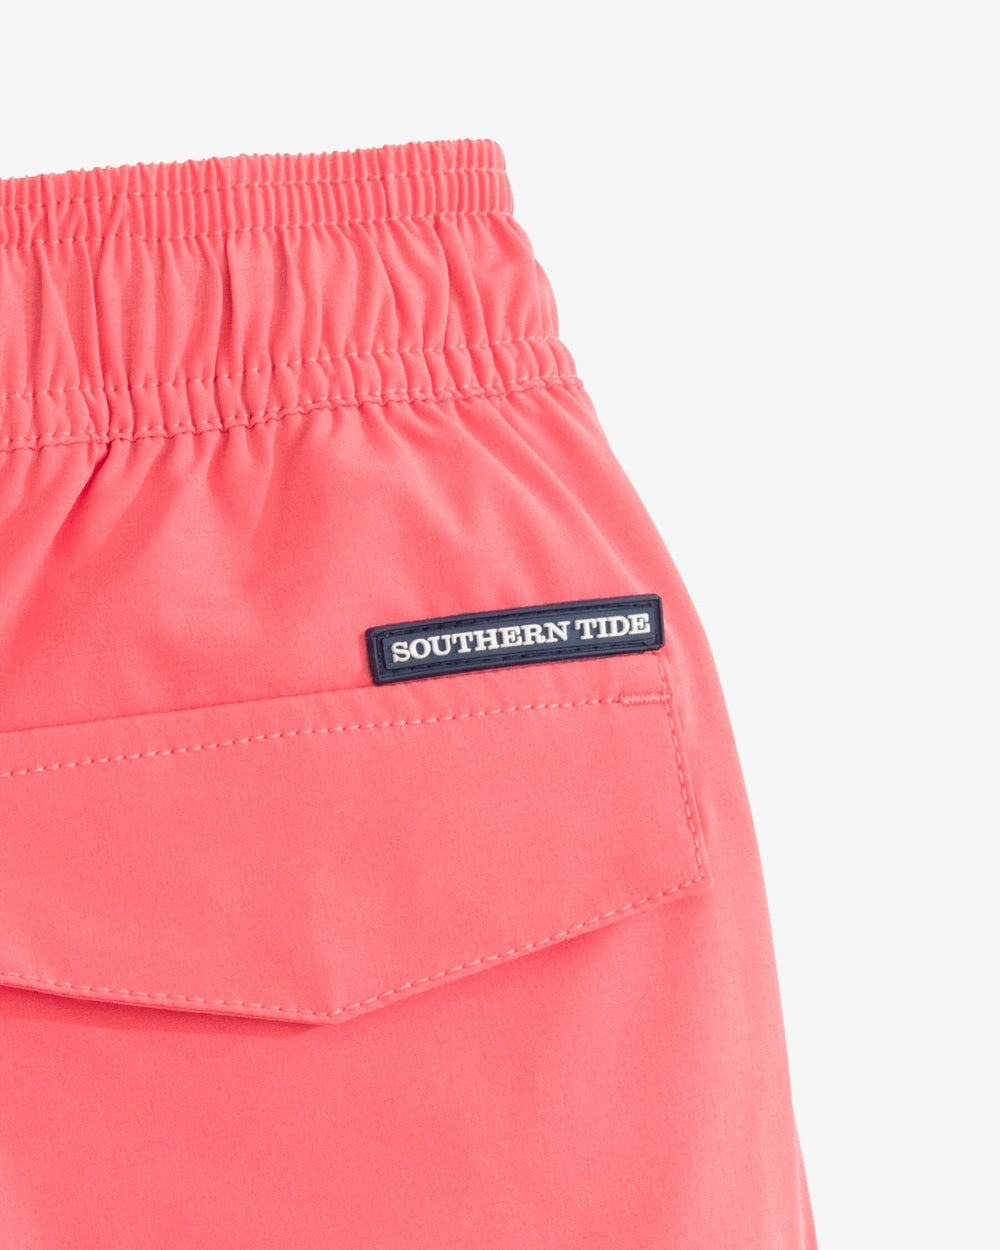 The detail view of the Southern Tide Boys Solid Swim Truck 2 0 by Southern Tide - Sunkist Coral